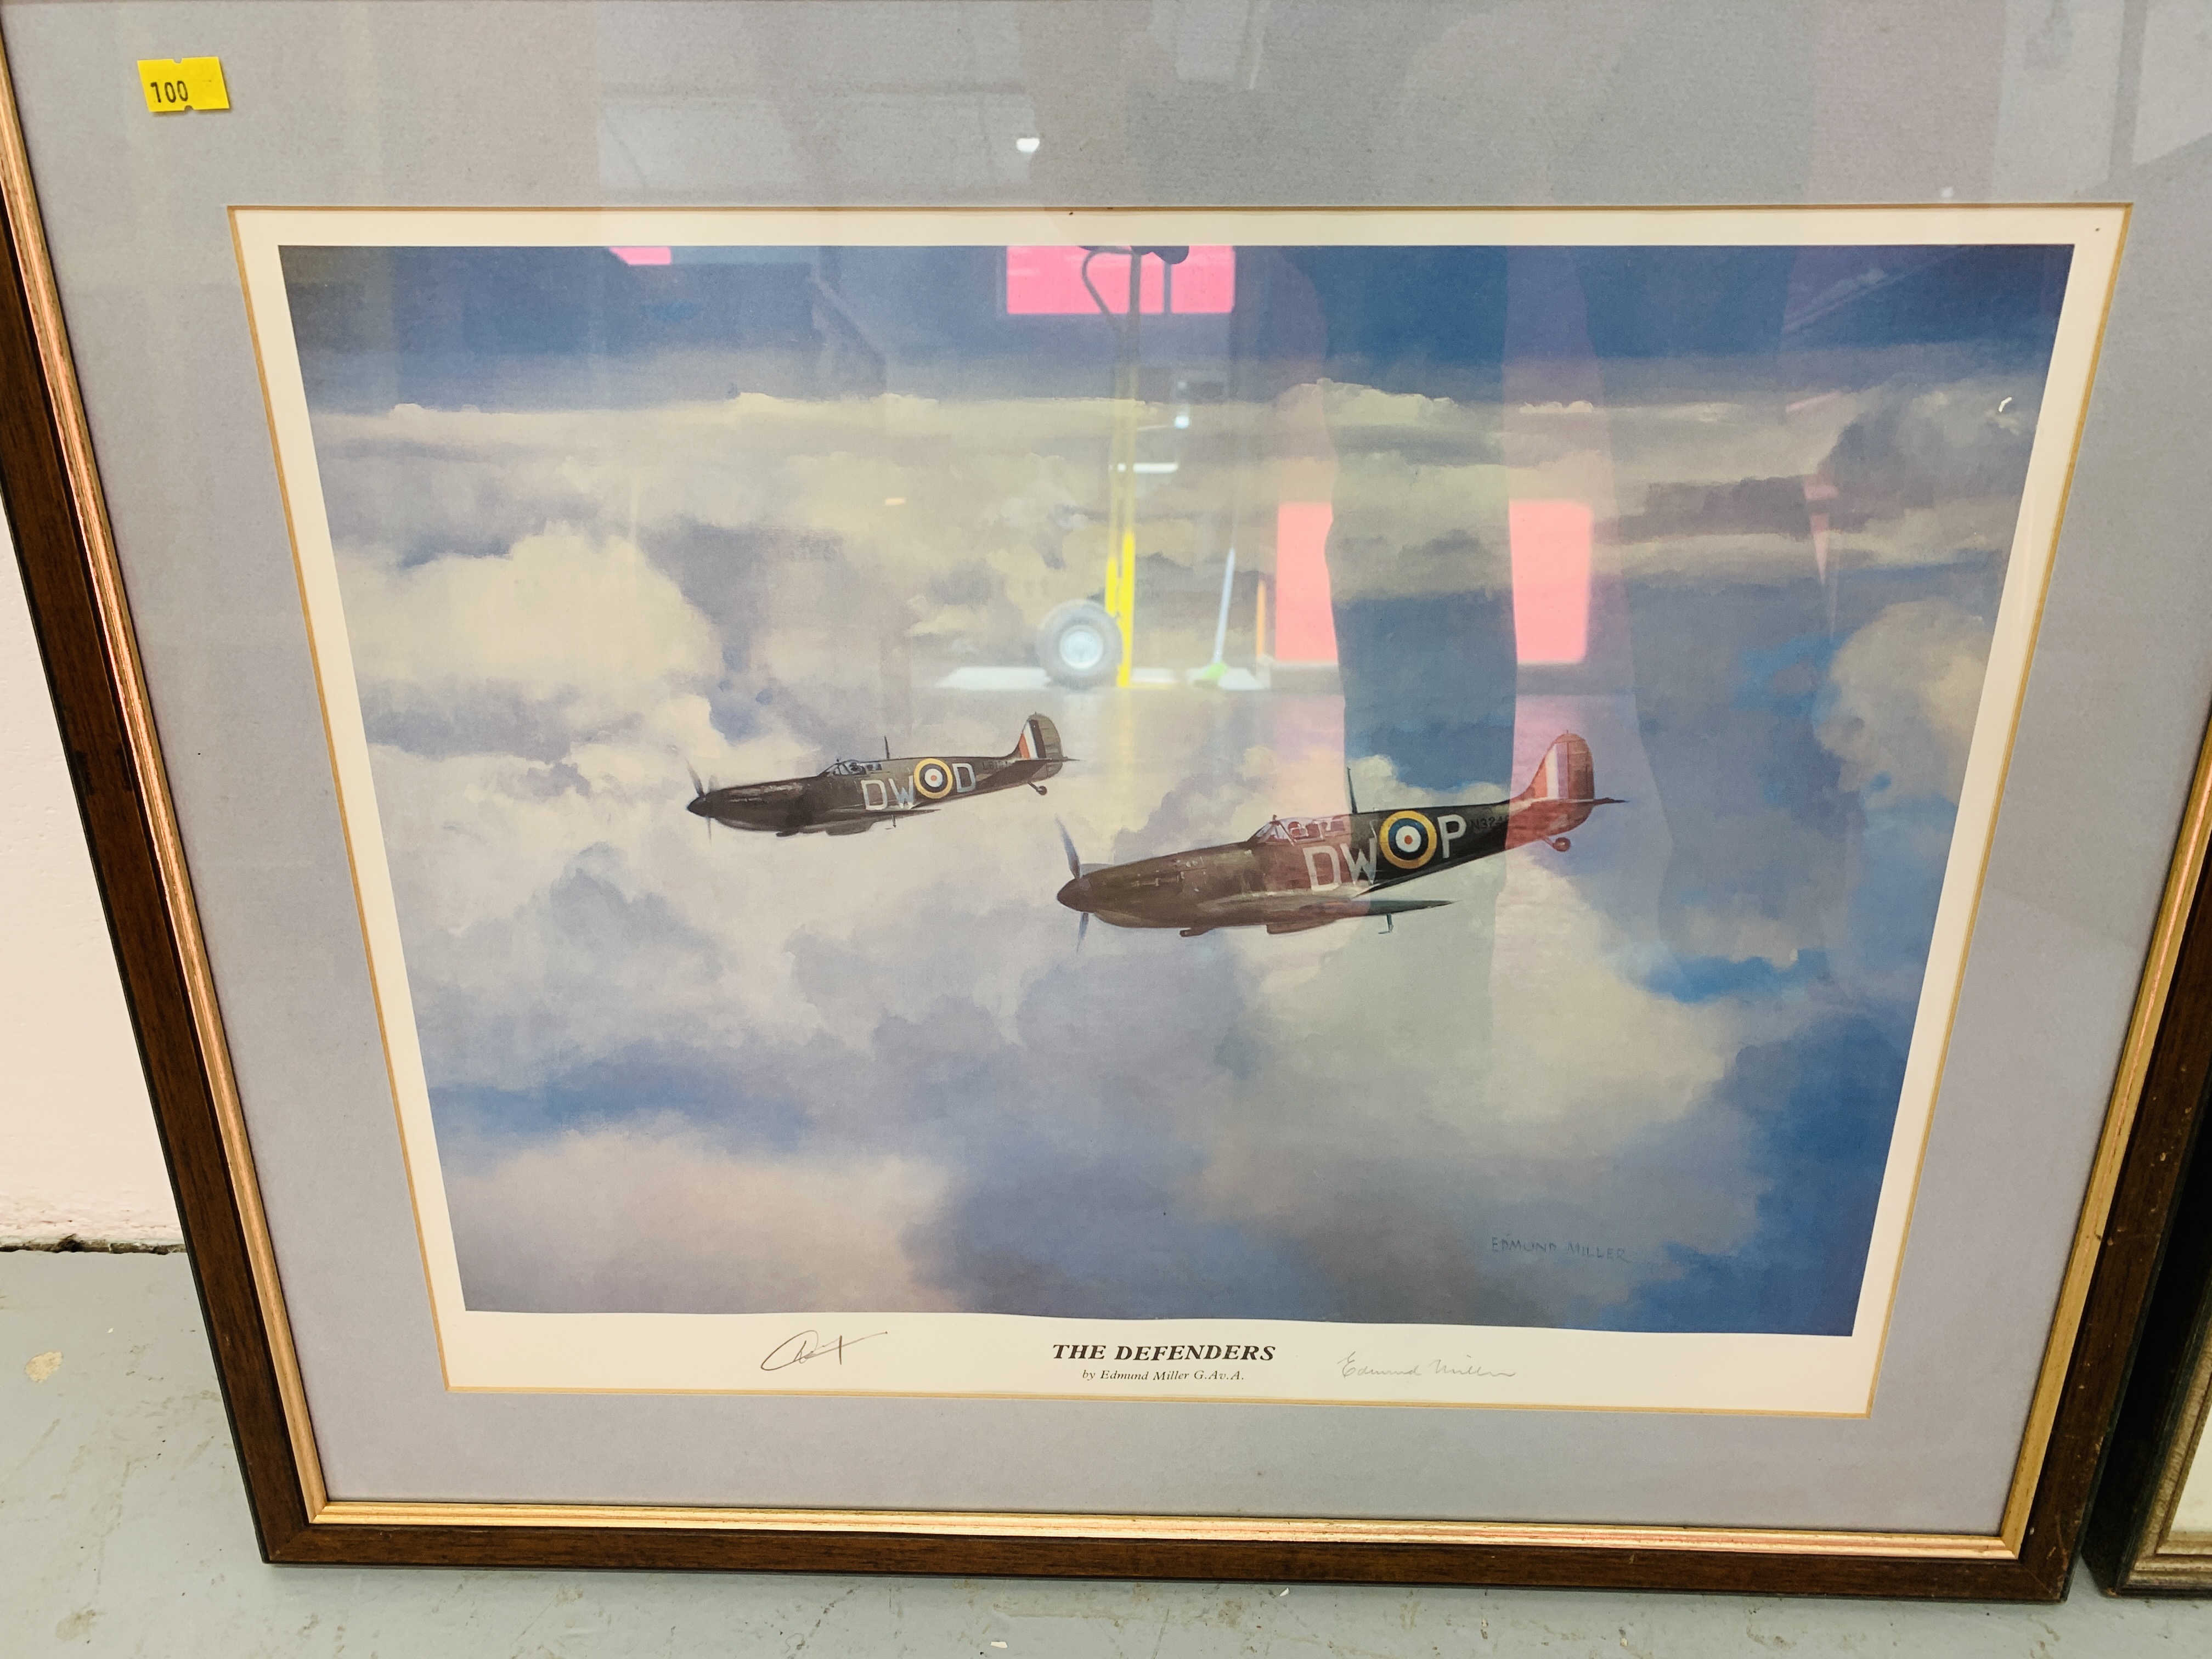 2 FRAMED AND MOUNTED FIGHTER PLANE PRINTS "HIGH SPIRITS" 1940, - Image 5 of 5